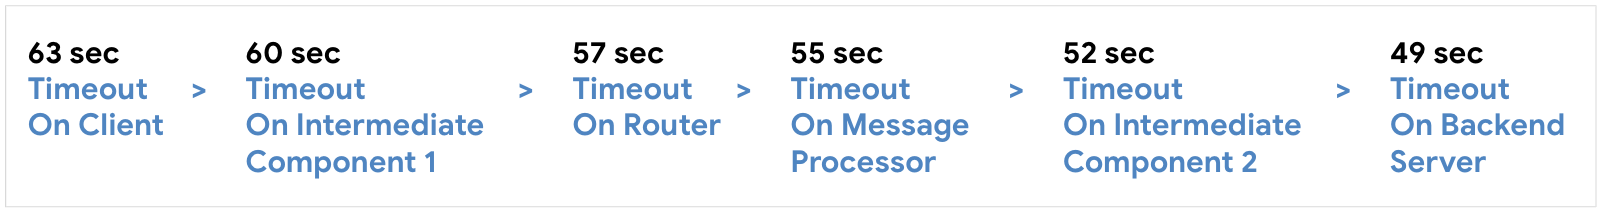 Configure timeout on client at 63 seconds, then Intermediate Component 1 at 60 seconds, then Router at 57 seconds, then Message Processor st 55 seconds, then Intermediate Component 2 at 52 seconds, then Backend Server at 59 seconds